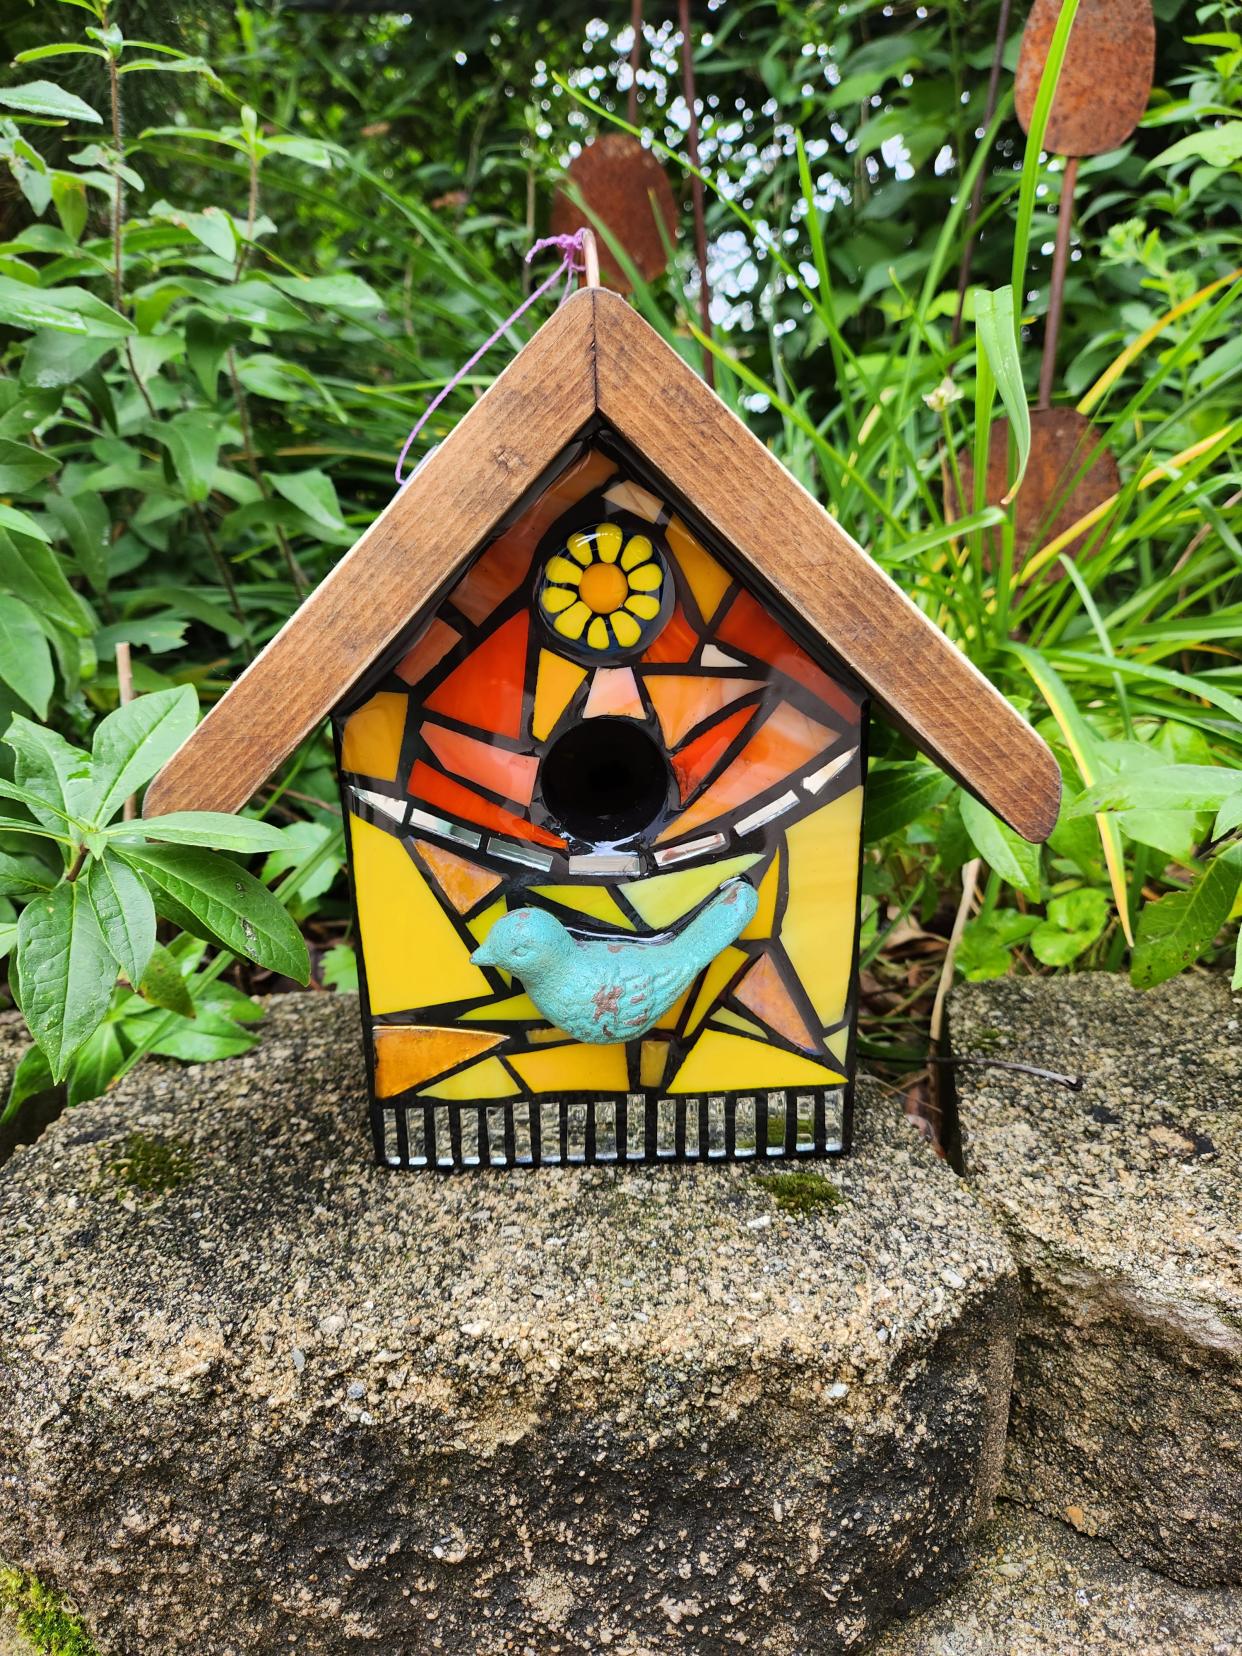 Green Bay artist Kimberly Moon Young creates art in several mediums, including these mosaic birdhouses.